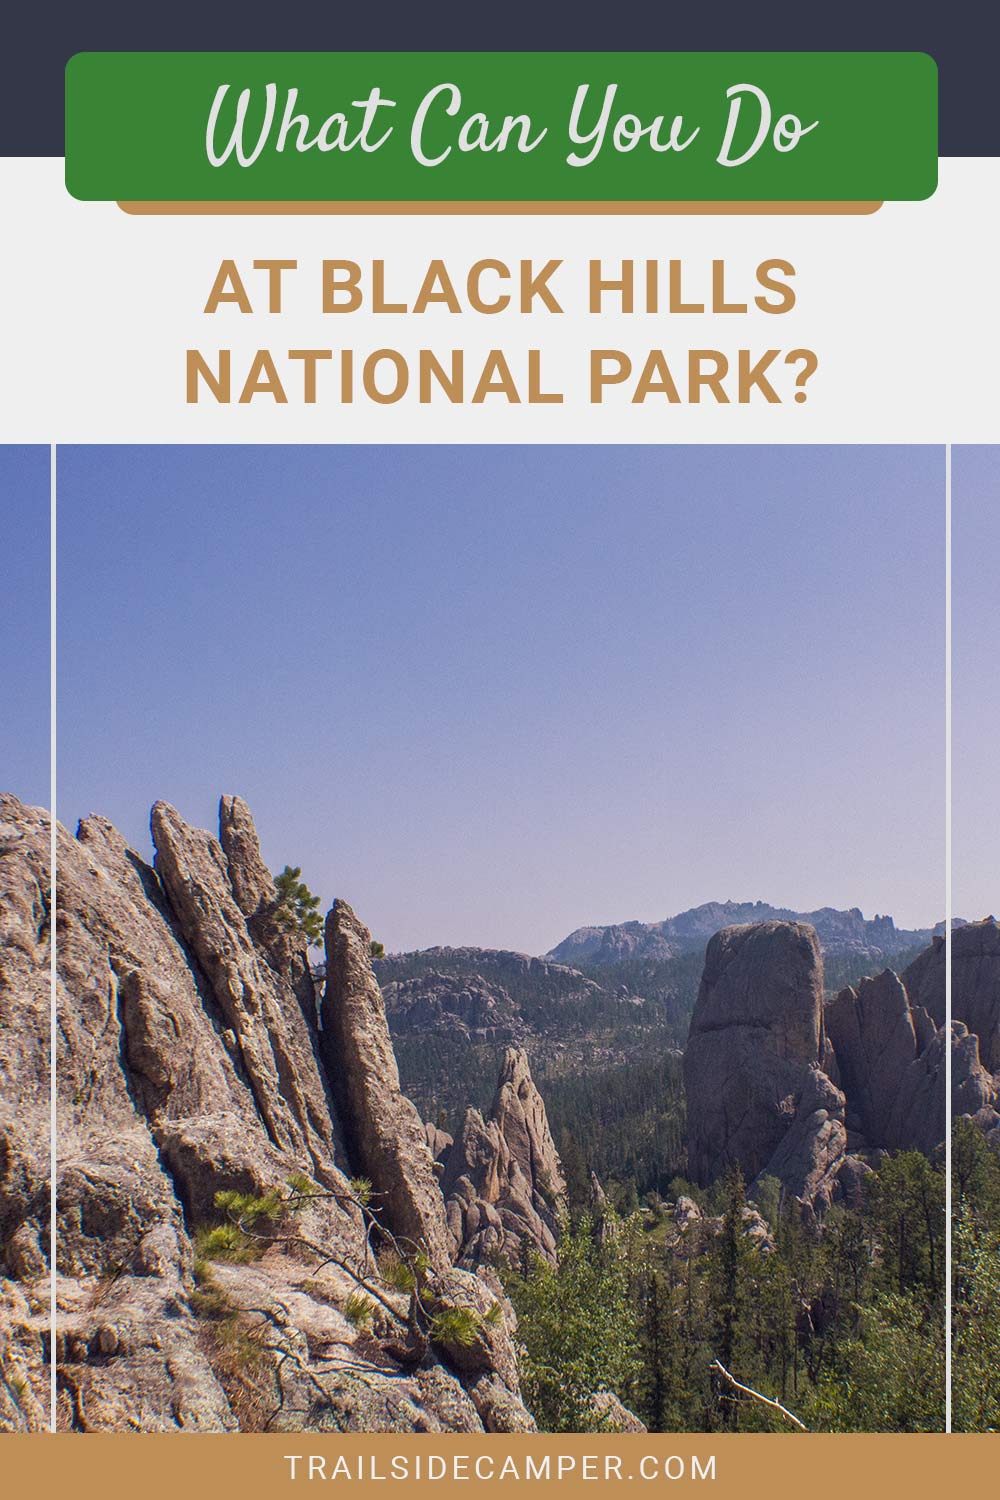 What Can You Do at Black Hills National Park?